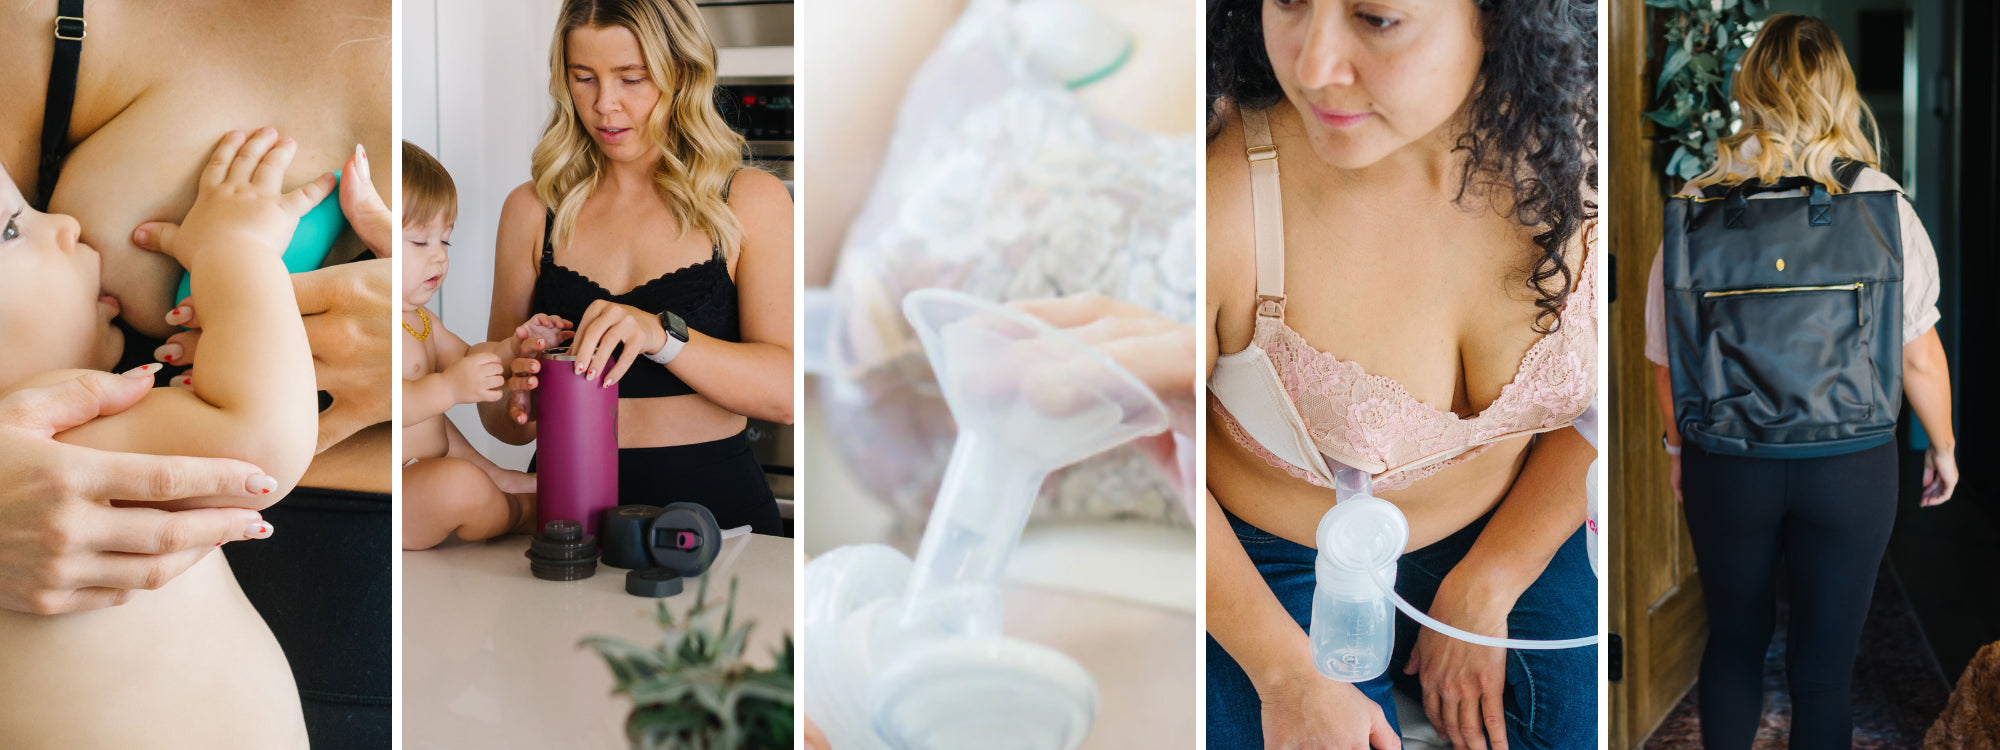 the dairy fairy - the dairy fairy guide - pregnancy - pumping bra - pumping bras - 